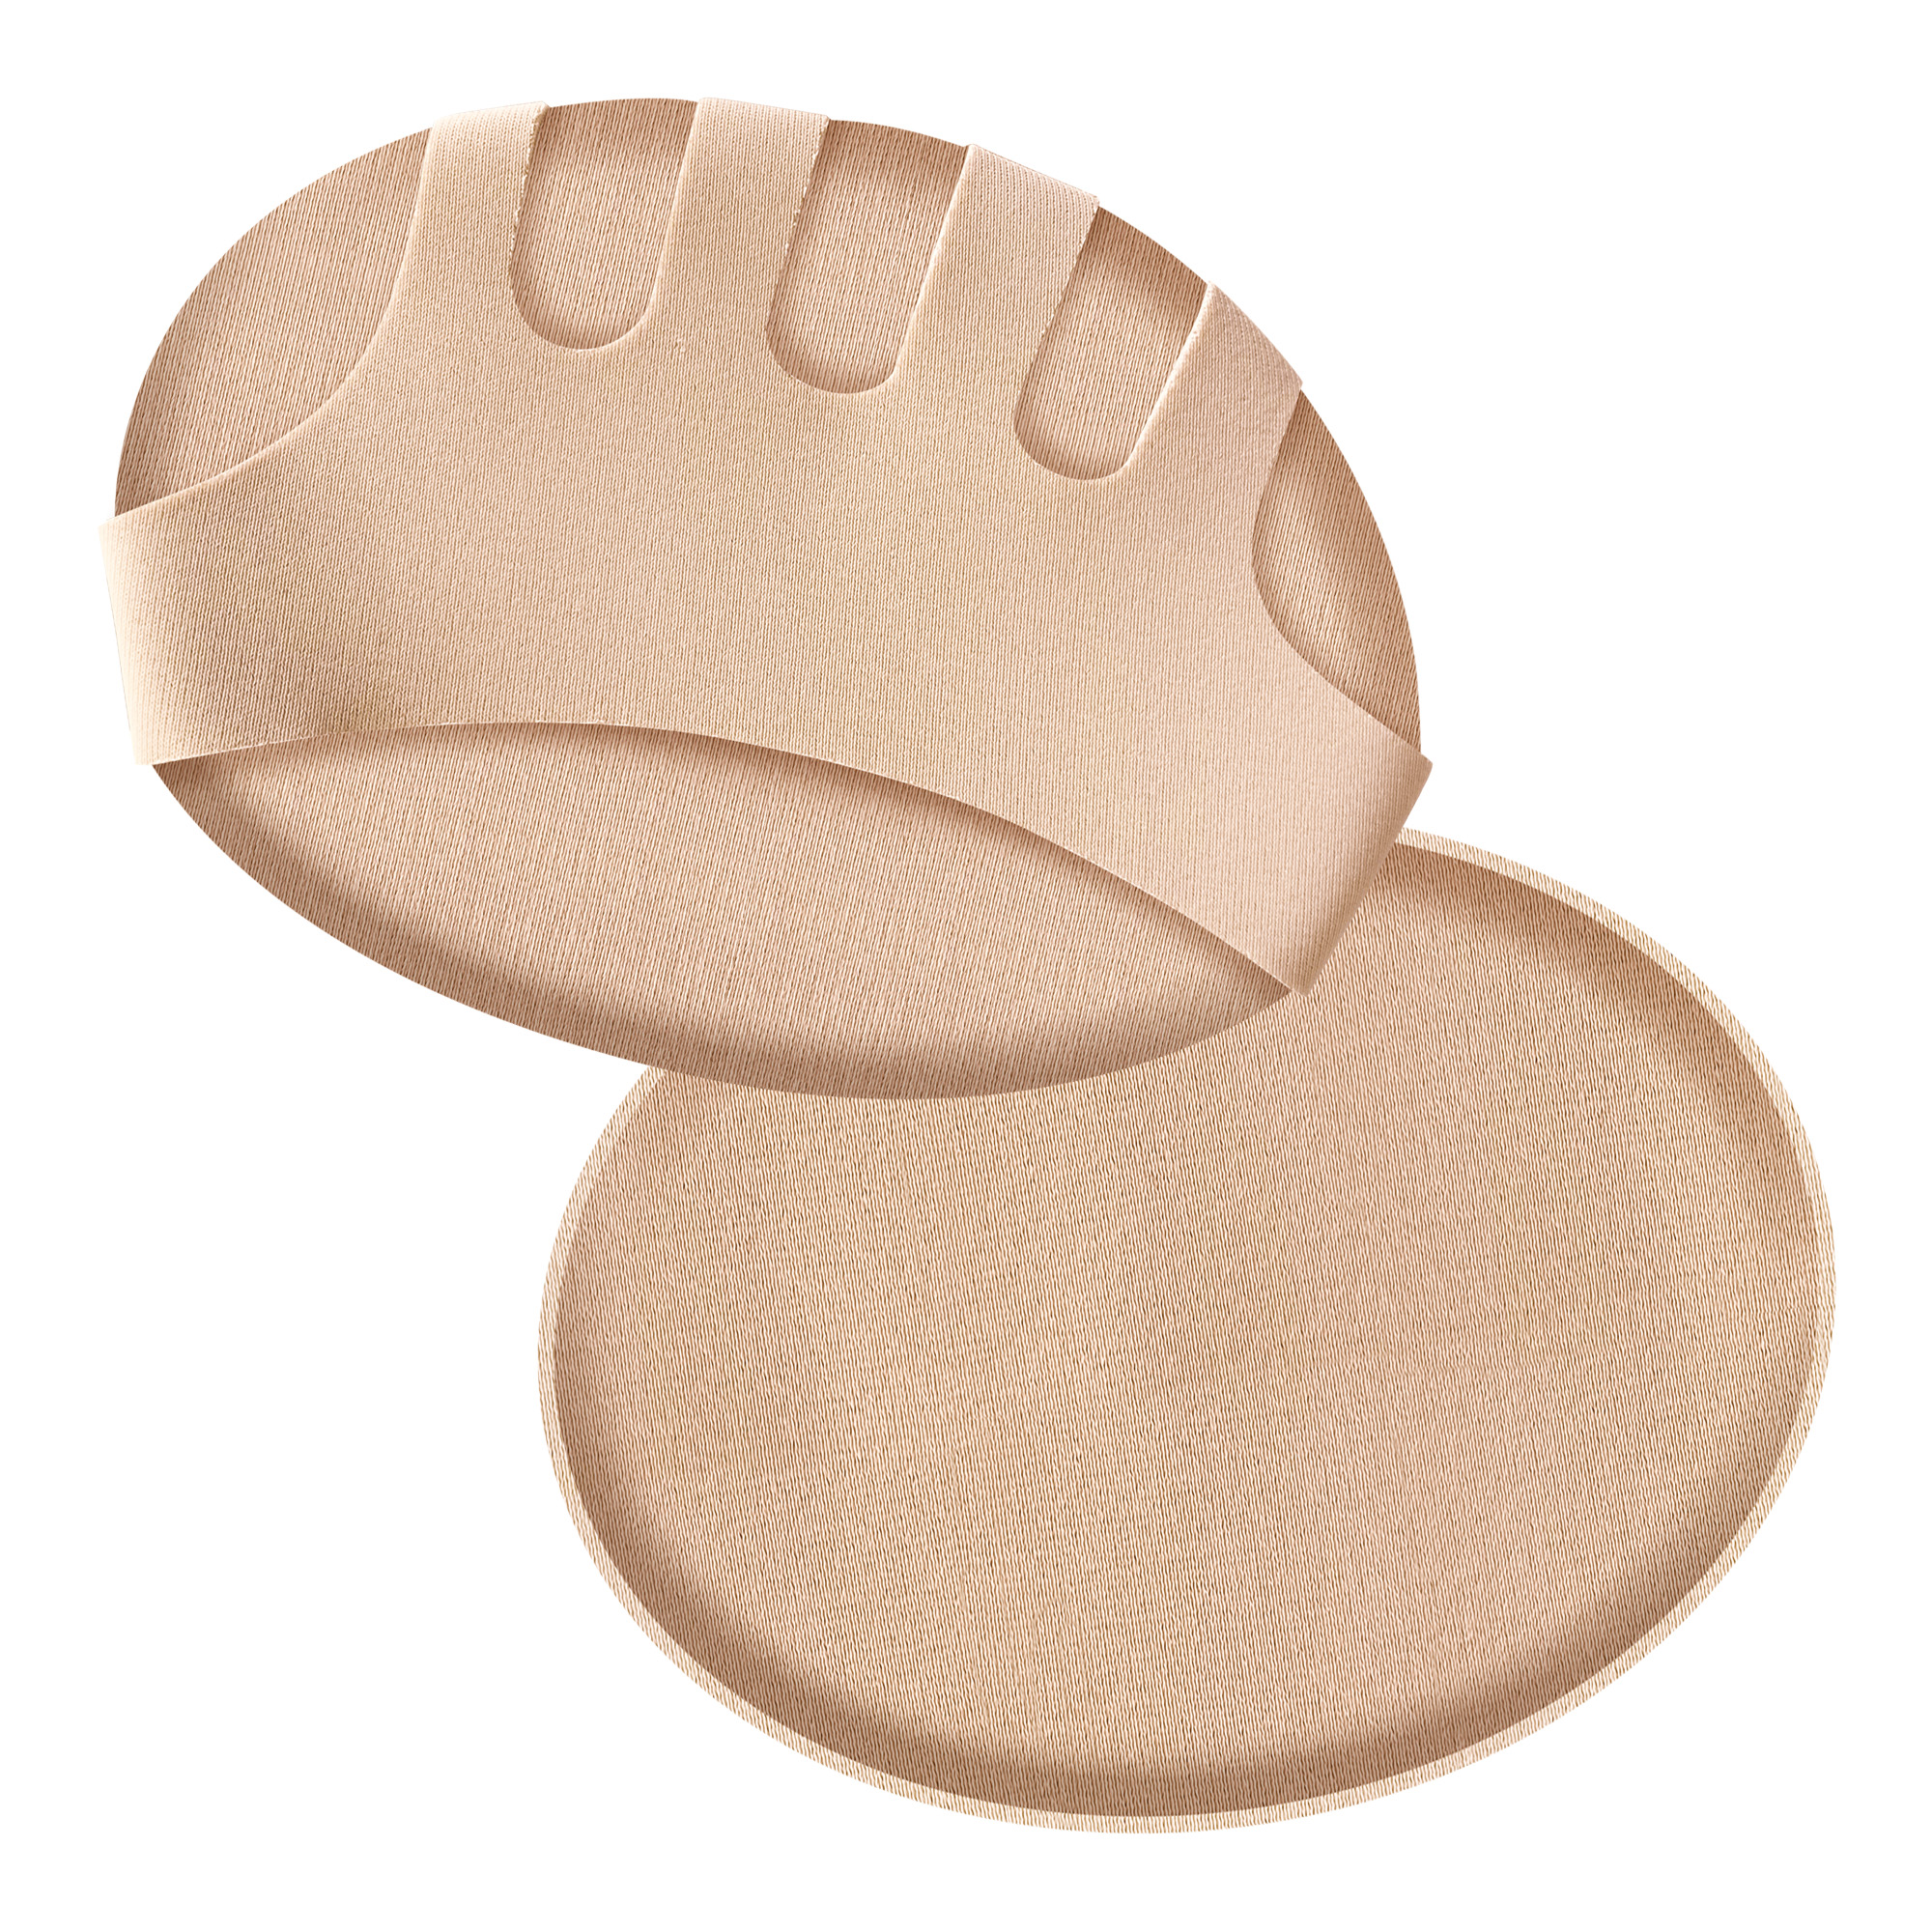 Display Forefoot comfort cushions in fabric and gel 8 packs